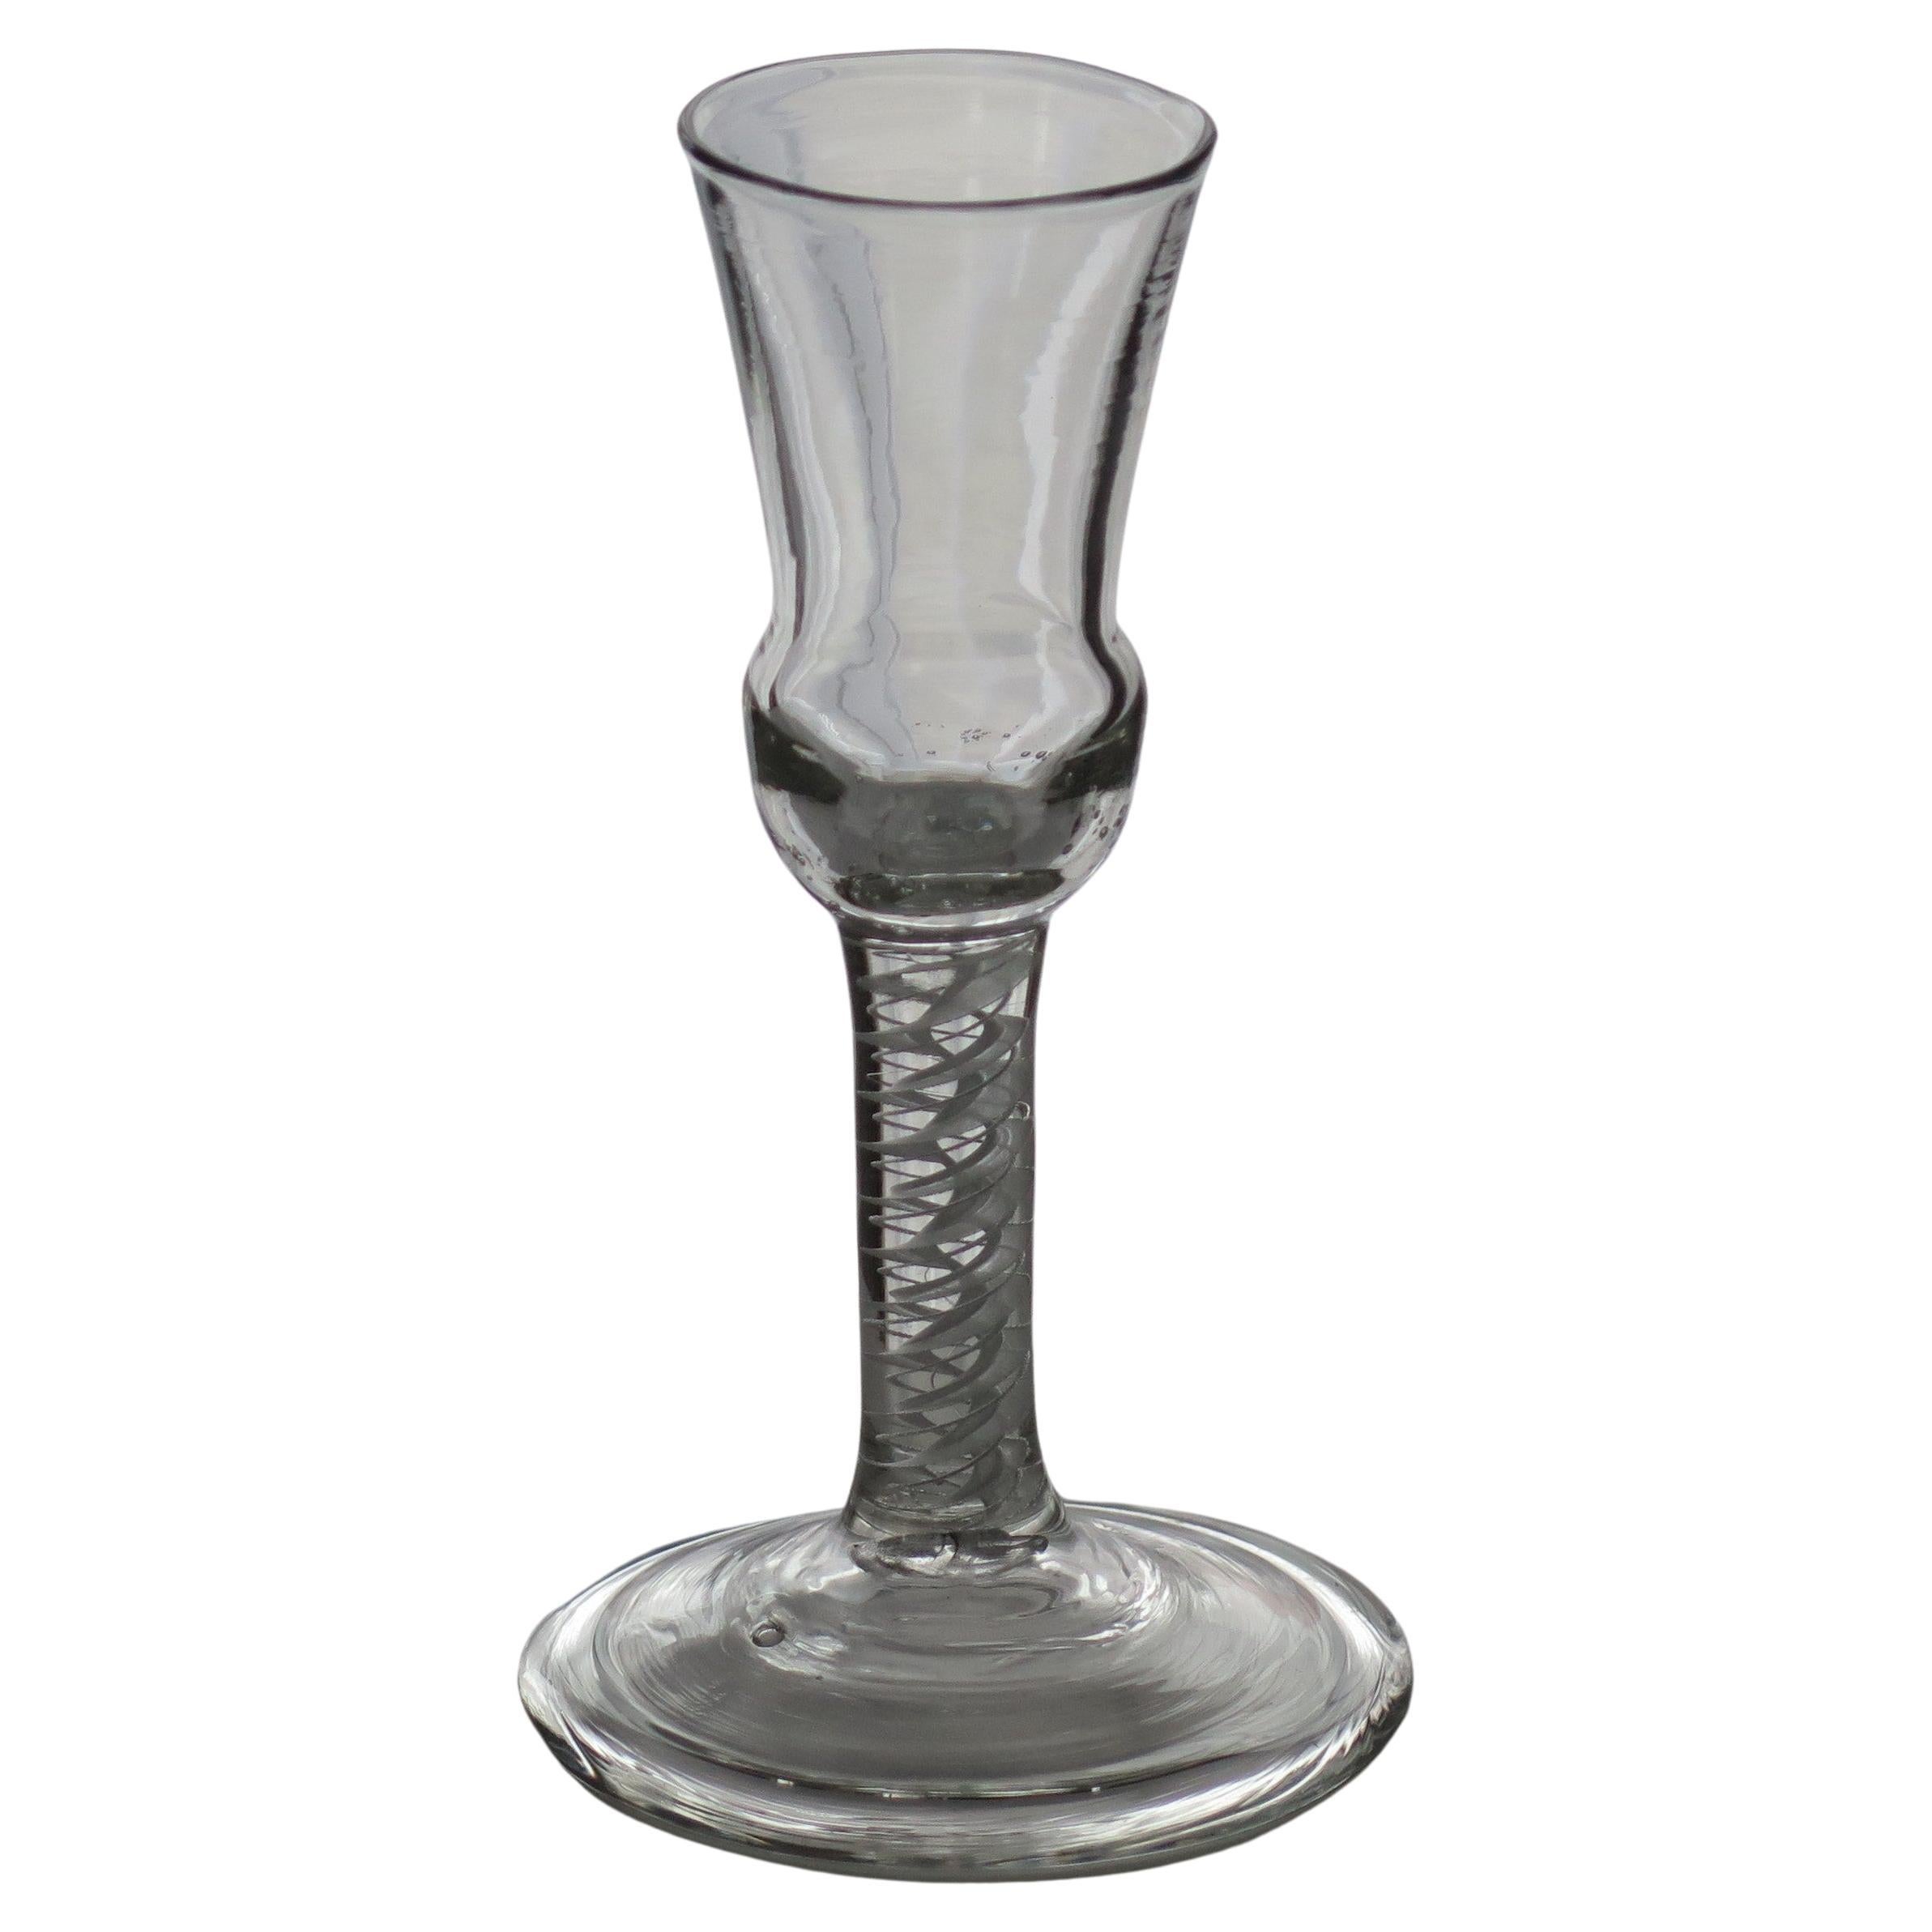 This is a superb hand-blown example of an English, mid-Georgian, wine or cordial drinking glass with a rare thistle bowl, thick double series opaque twist (DSOT) stem and wide folded foot, dating from the middle of the 18th century, circa